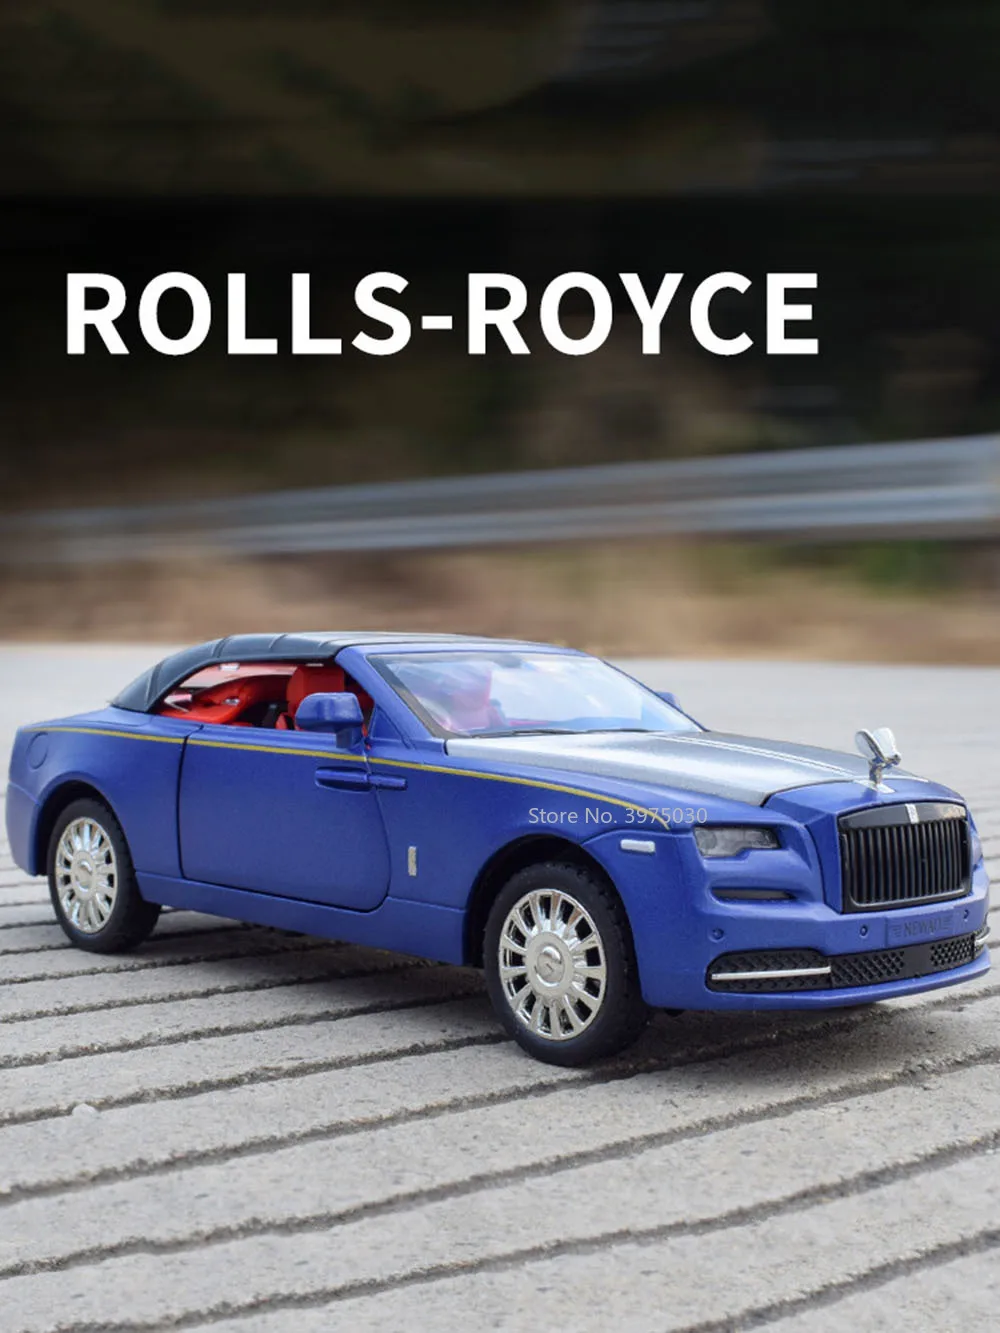 

1/32 Alloy Diecast Limousine Rolls Royce Dawn Car Model Toy Simulation Vehicle Pull Back Sound Light Collection Toy for Boy Gift